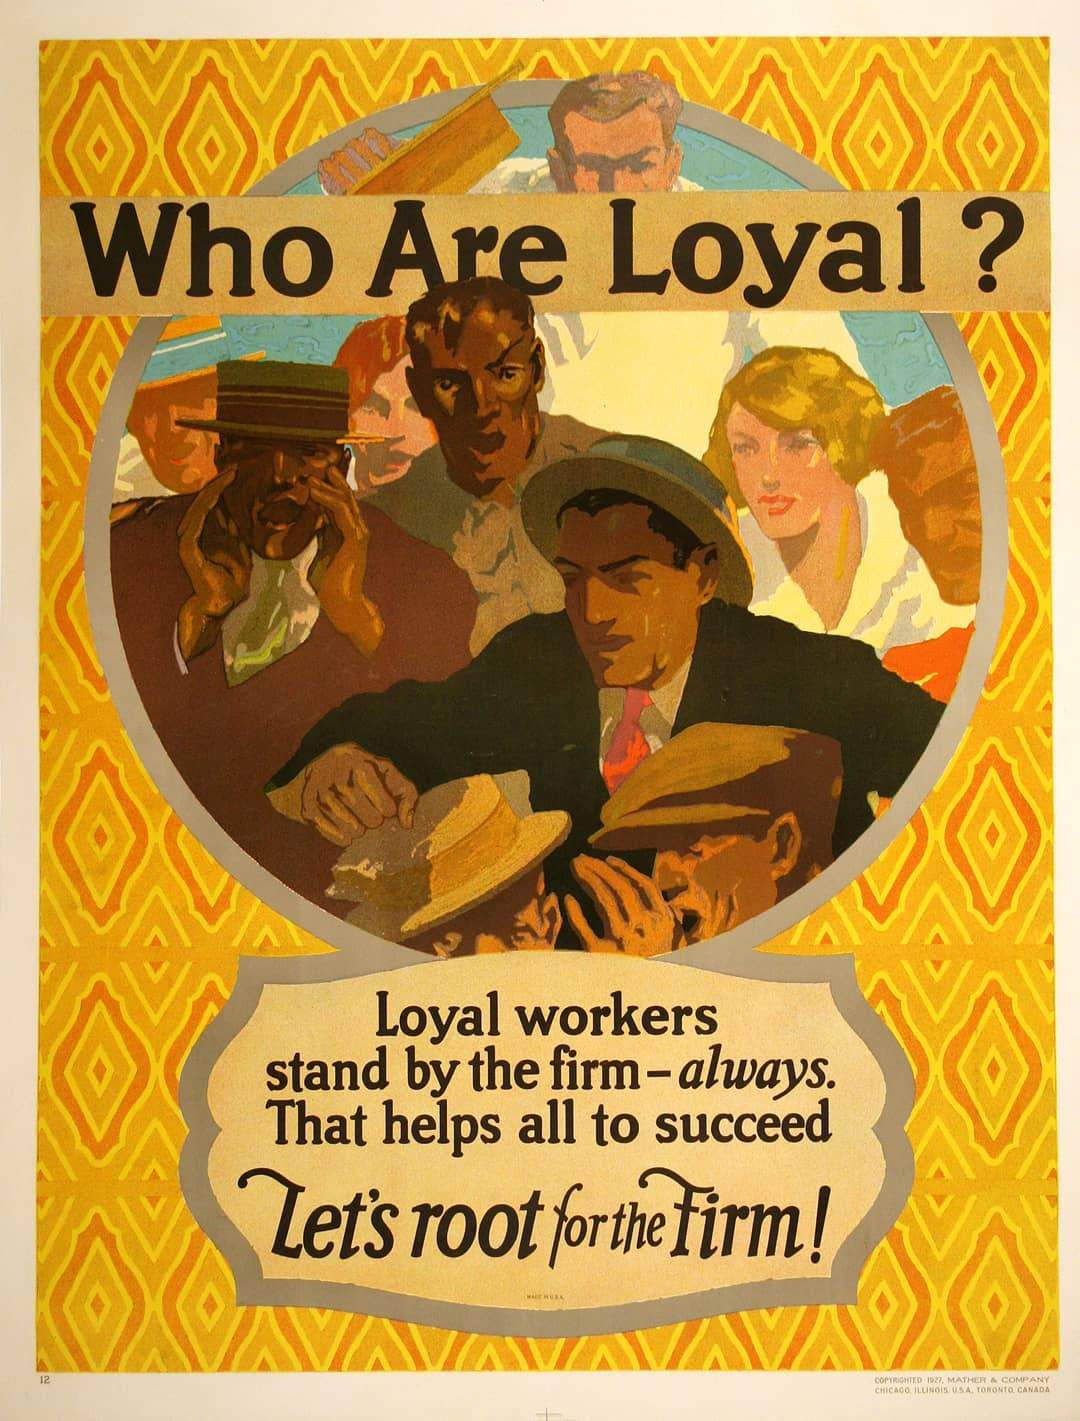 Original Mather Work Incentive Poster 1927 - Who Are Loyal